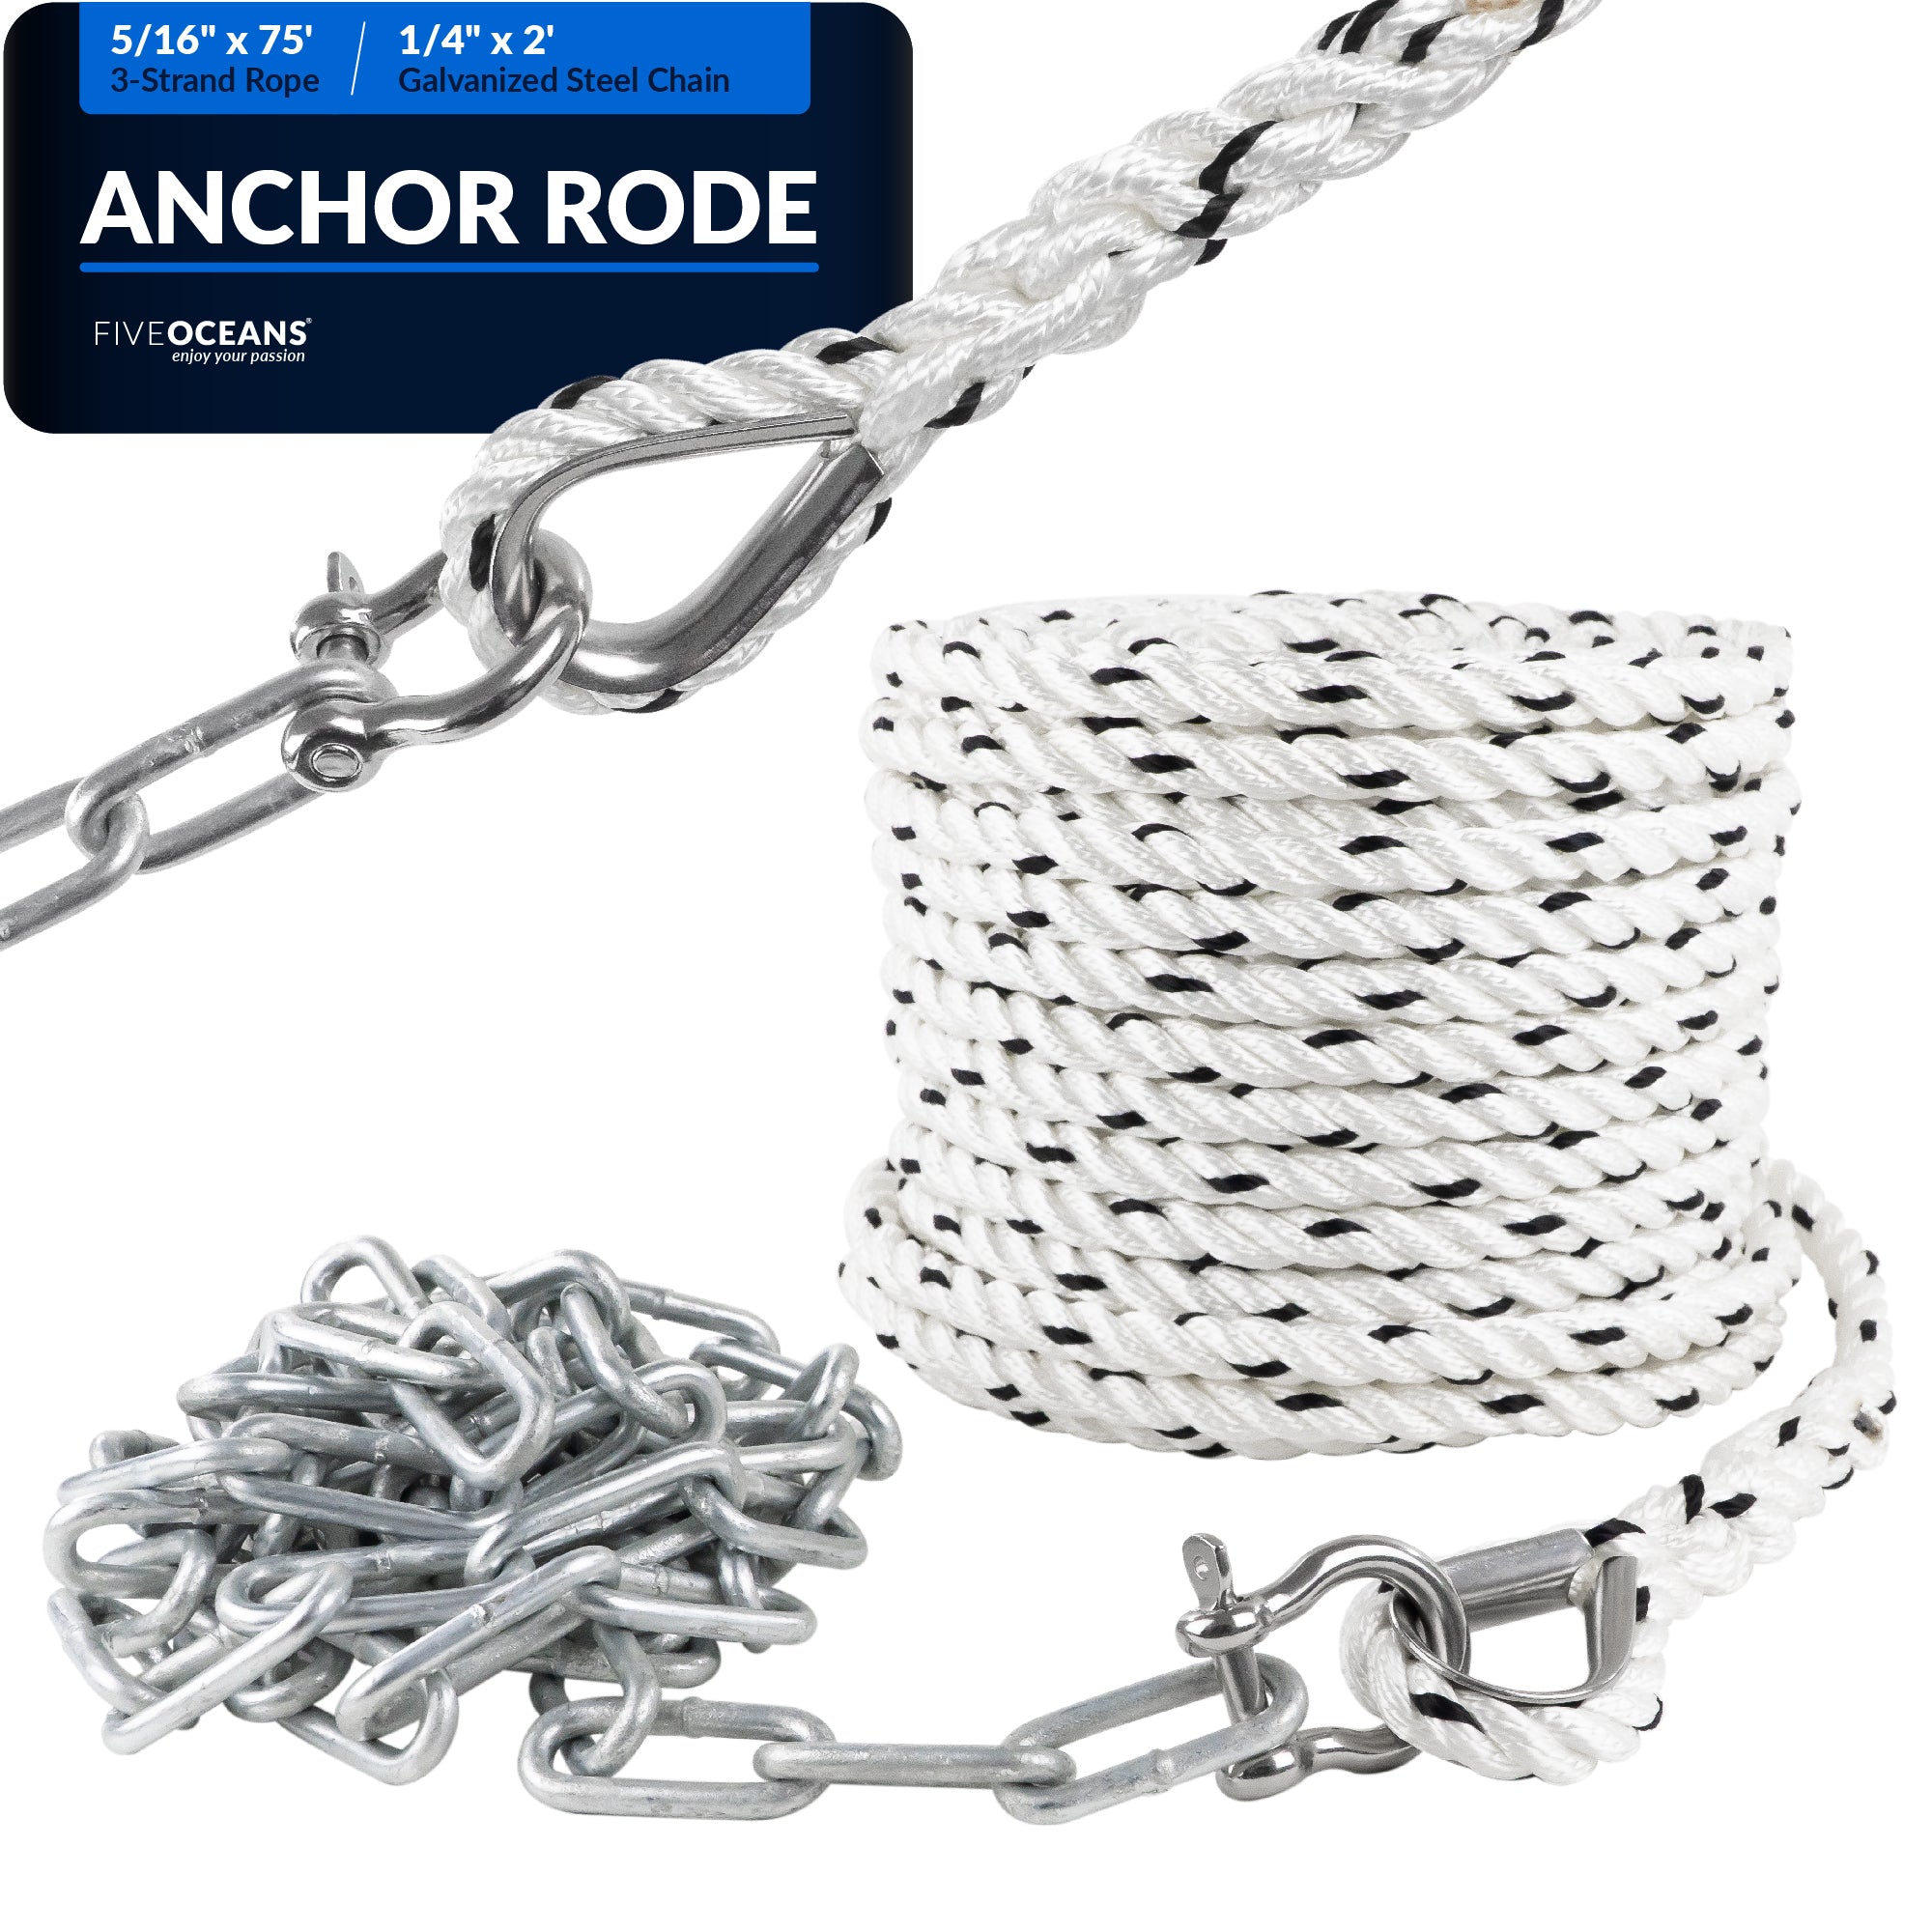 Anchor Rode, 5/16" x 75' Nylon 3-Strand Rope, 1/4" x 2' Hot Dipped Galvanized Steel Chain - FO4576